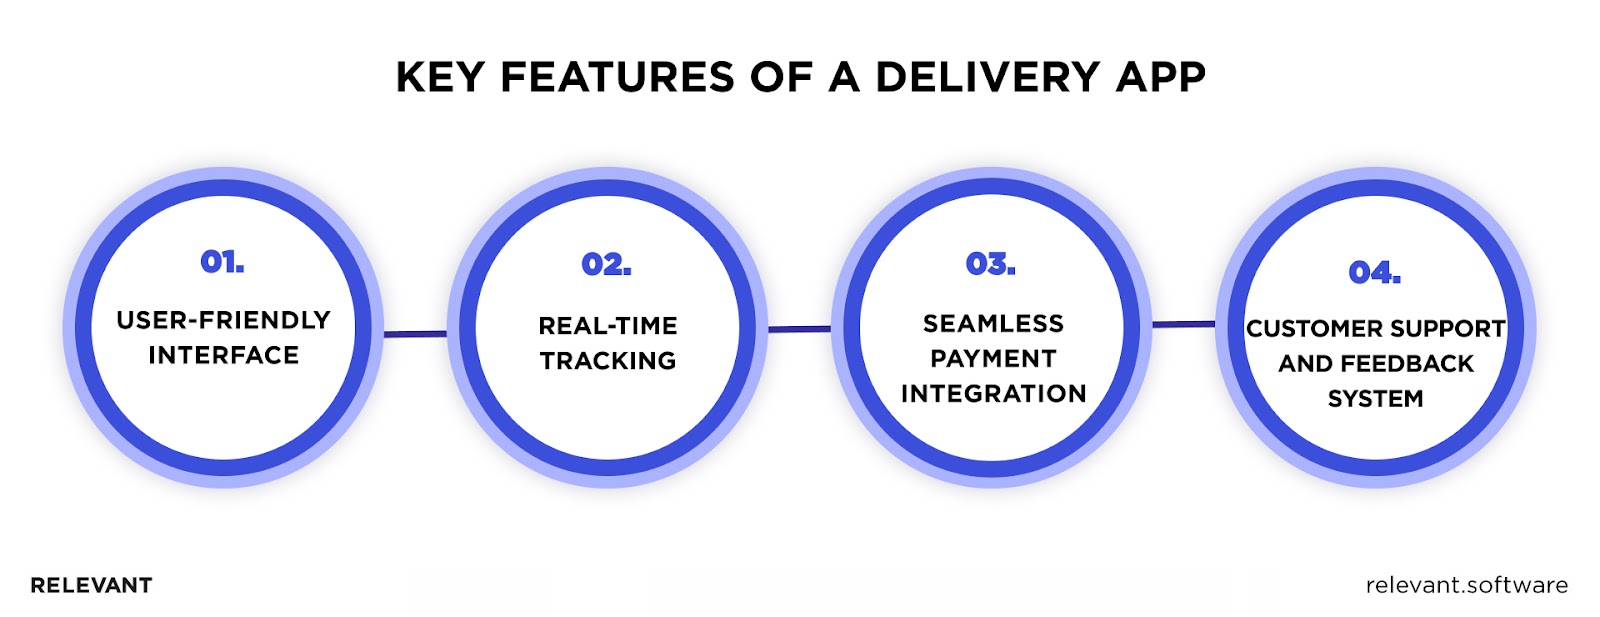 Features of a Delivery App